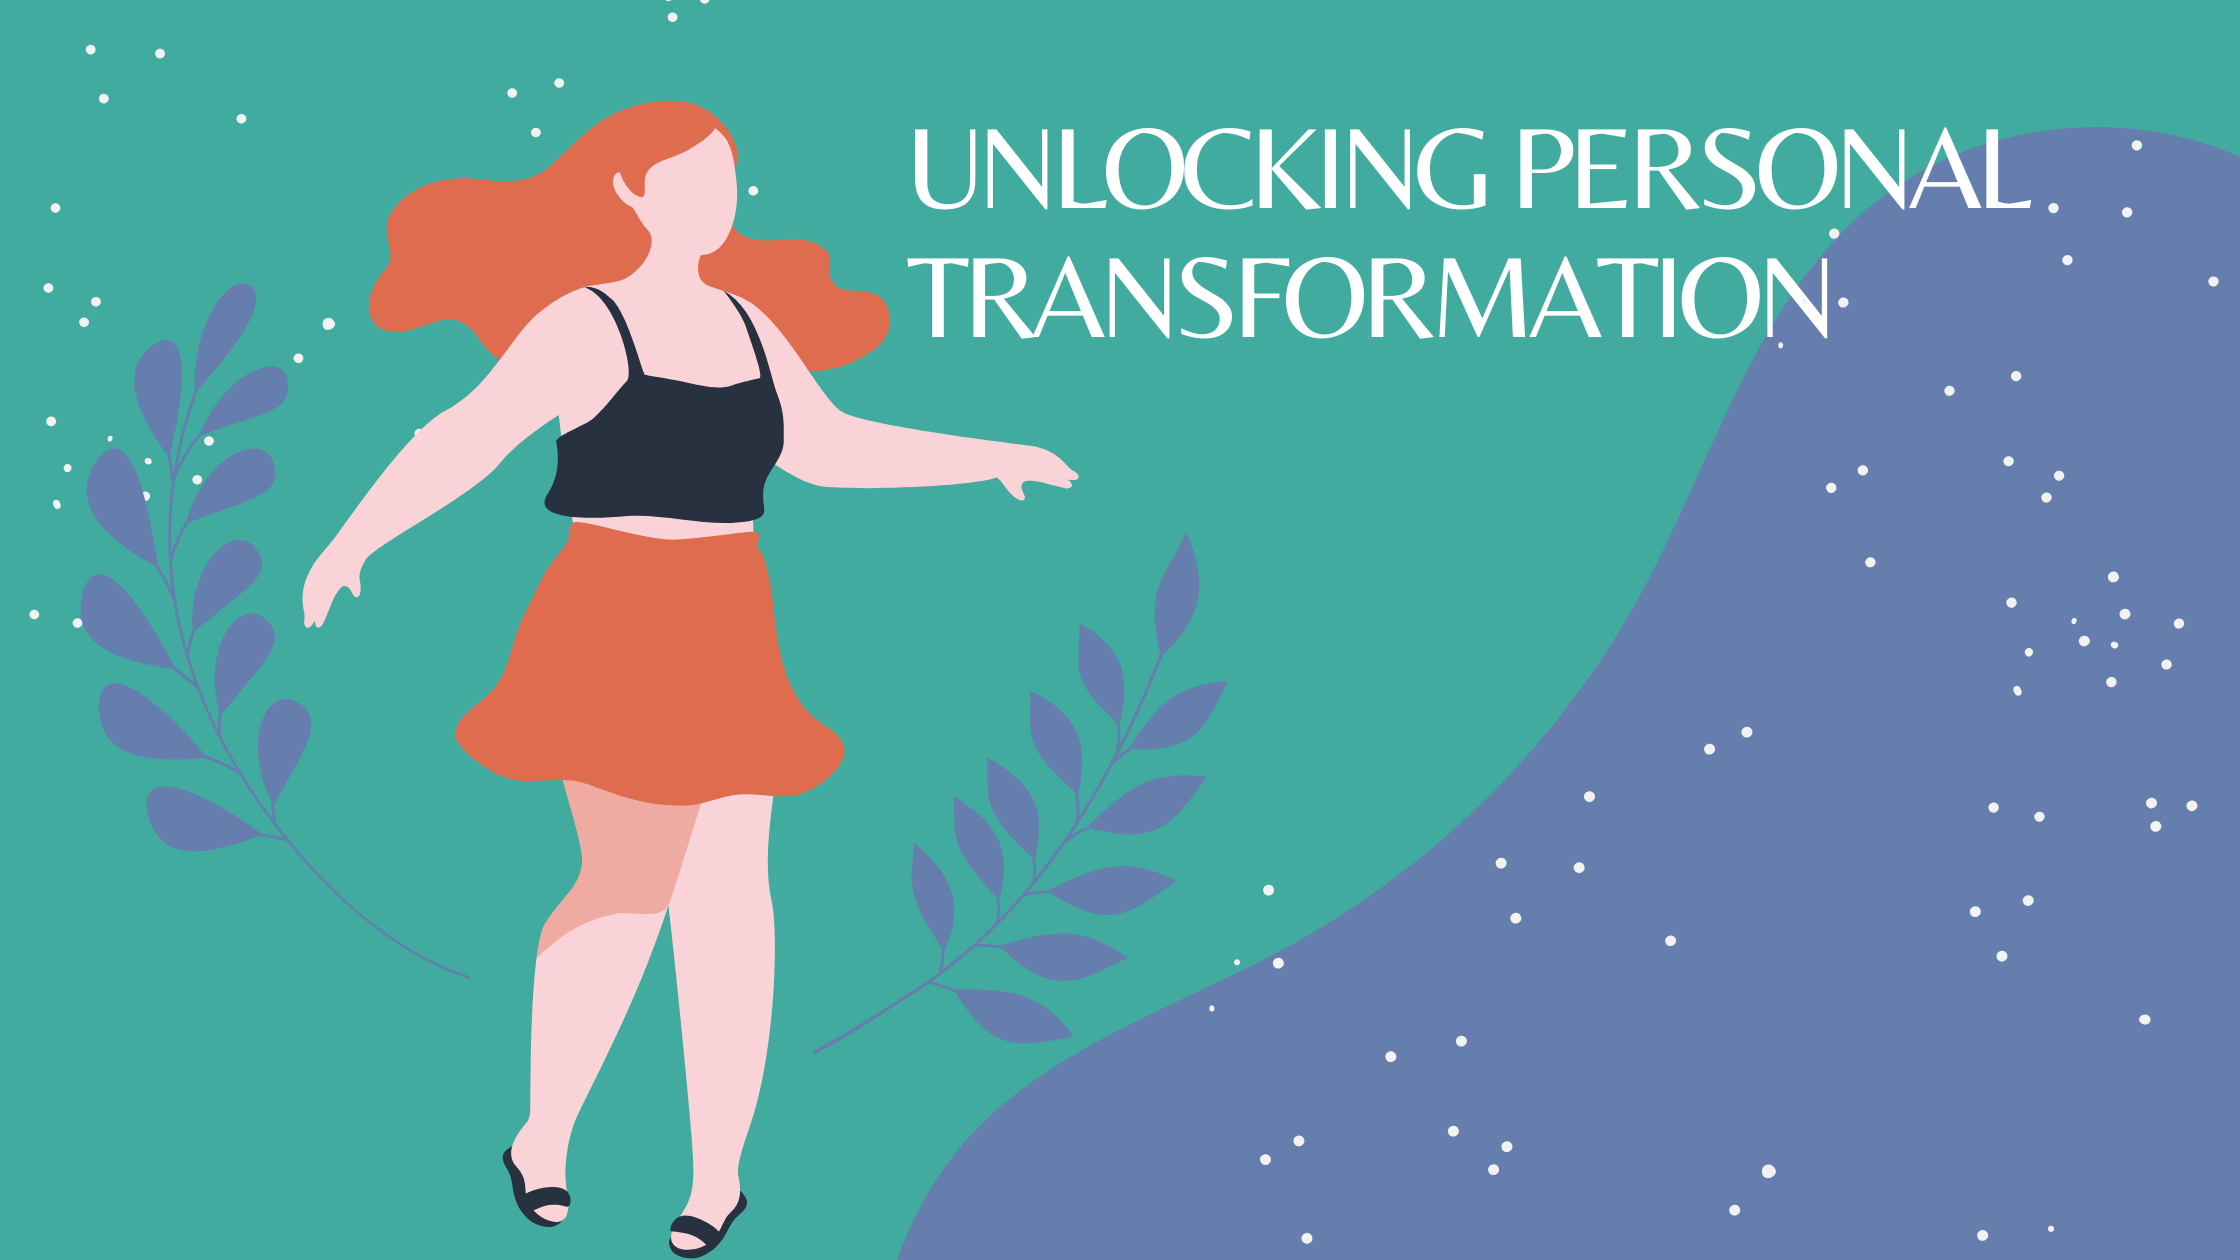 Unlocking Personal Transformation: 6 Steps to Rediscover Your Passion